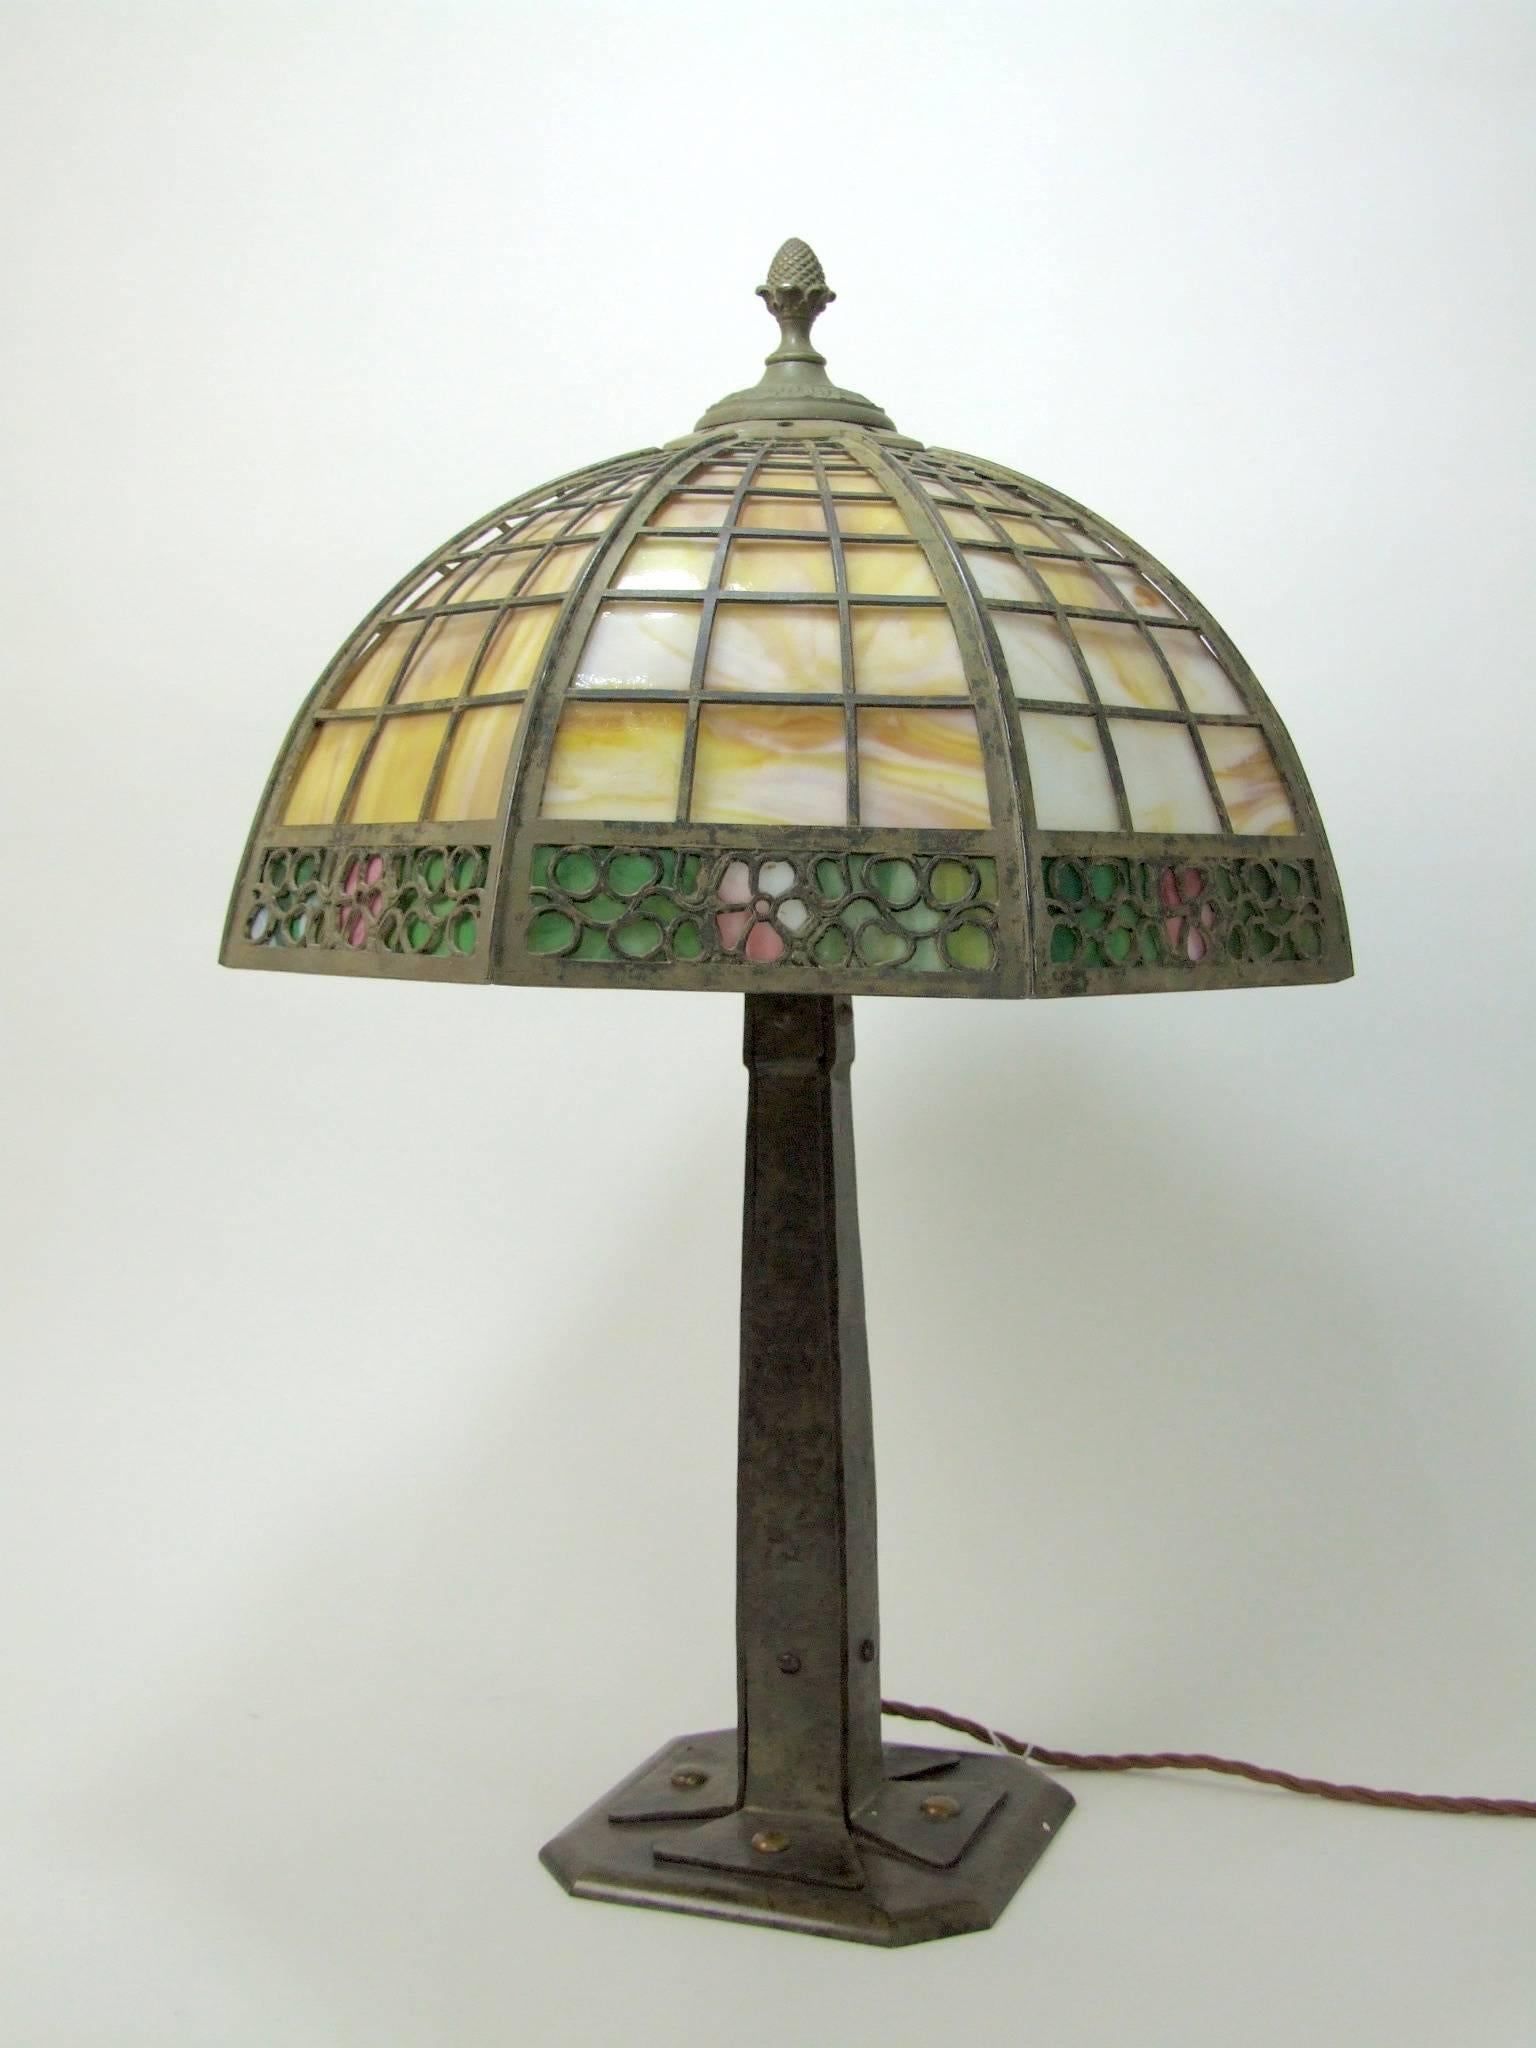 Large Miller/Tiffany Studio style metal lamp of either green patinated bronze or wrought metal with pâte de verre glass panel shade. Date unknown but appears to be of some vintage and in the Mission style and definitely not a modern reproduction. A